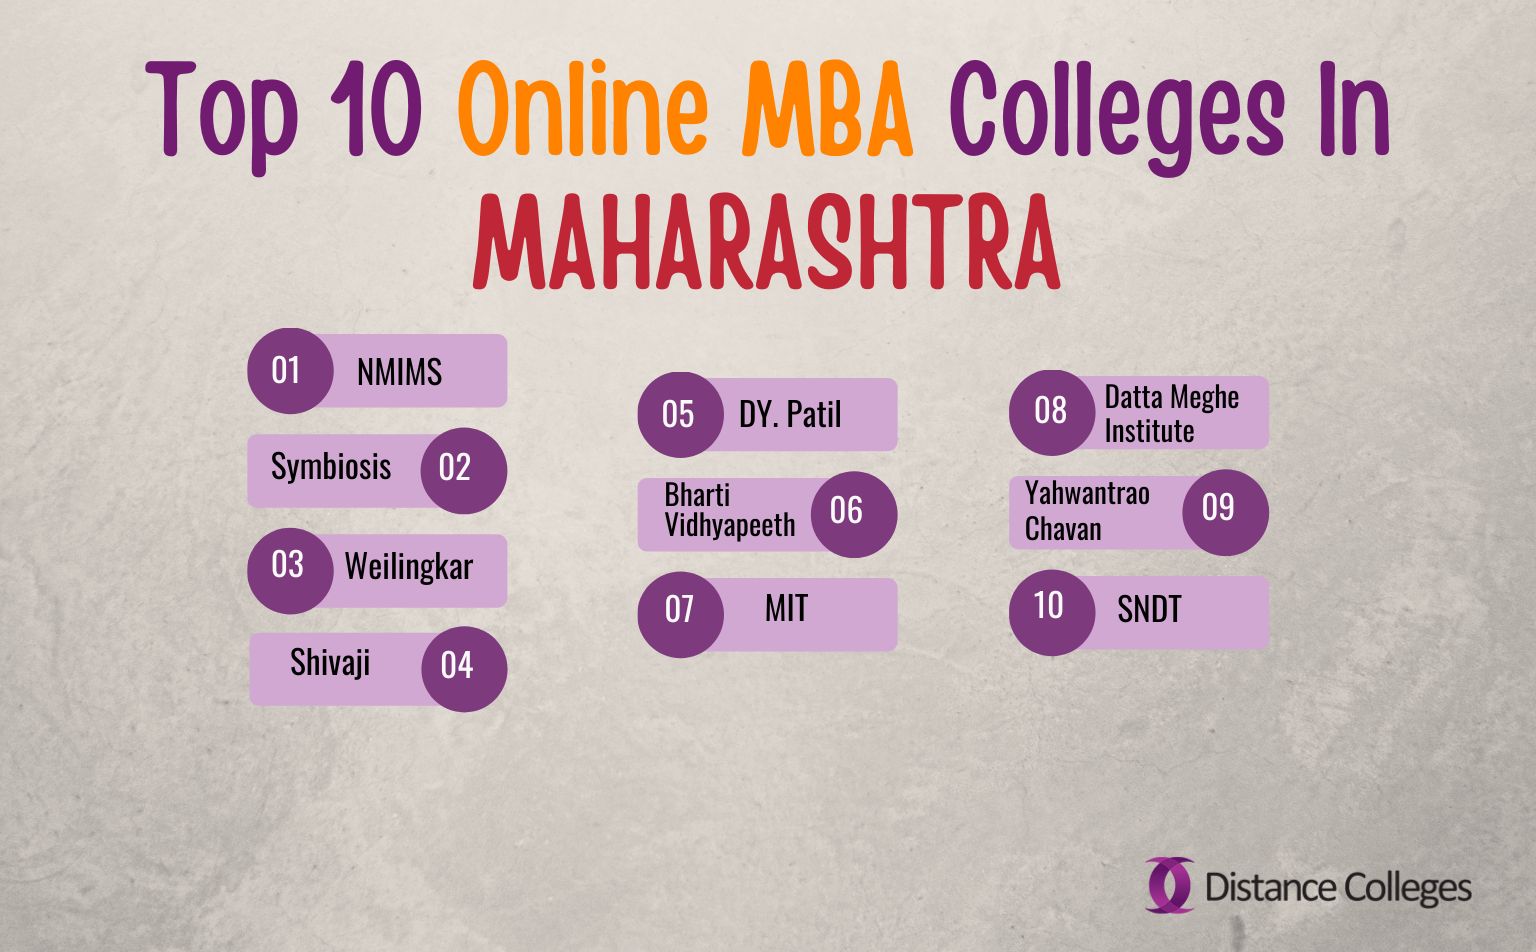 Top 10 Online MBA Colleges In Maharashtra